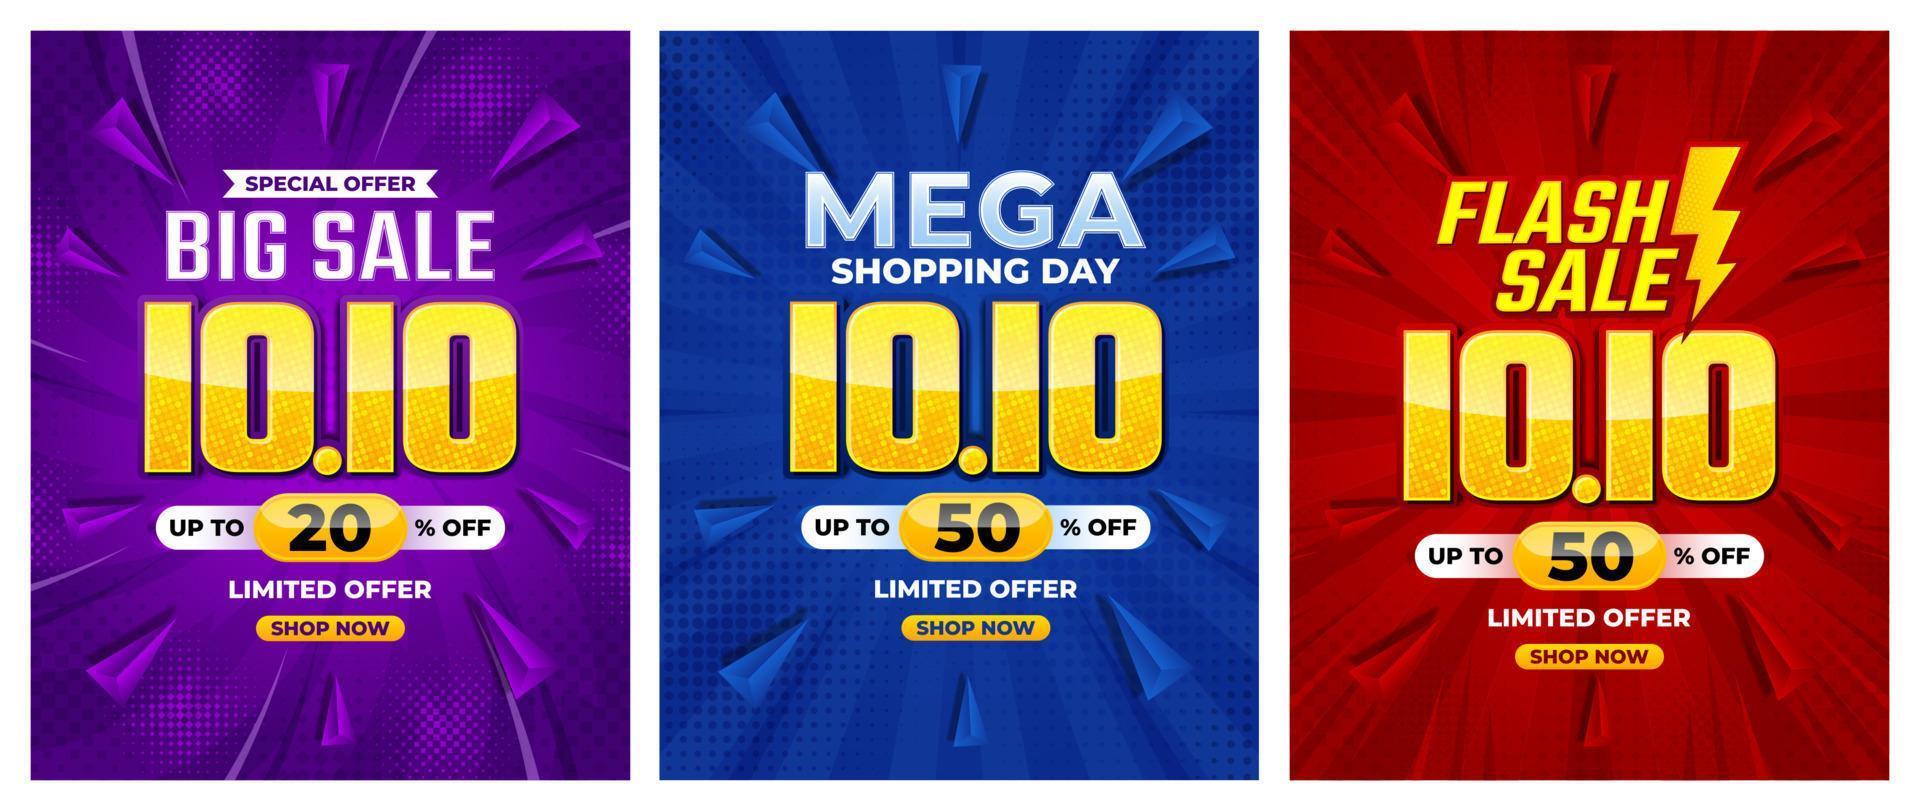 10.10 Shopping day 2022 big sale, mega sale, flash sale banner background for business retail promotion vector for banner, poster, social media feed